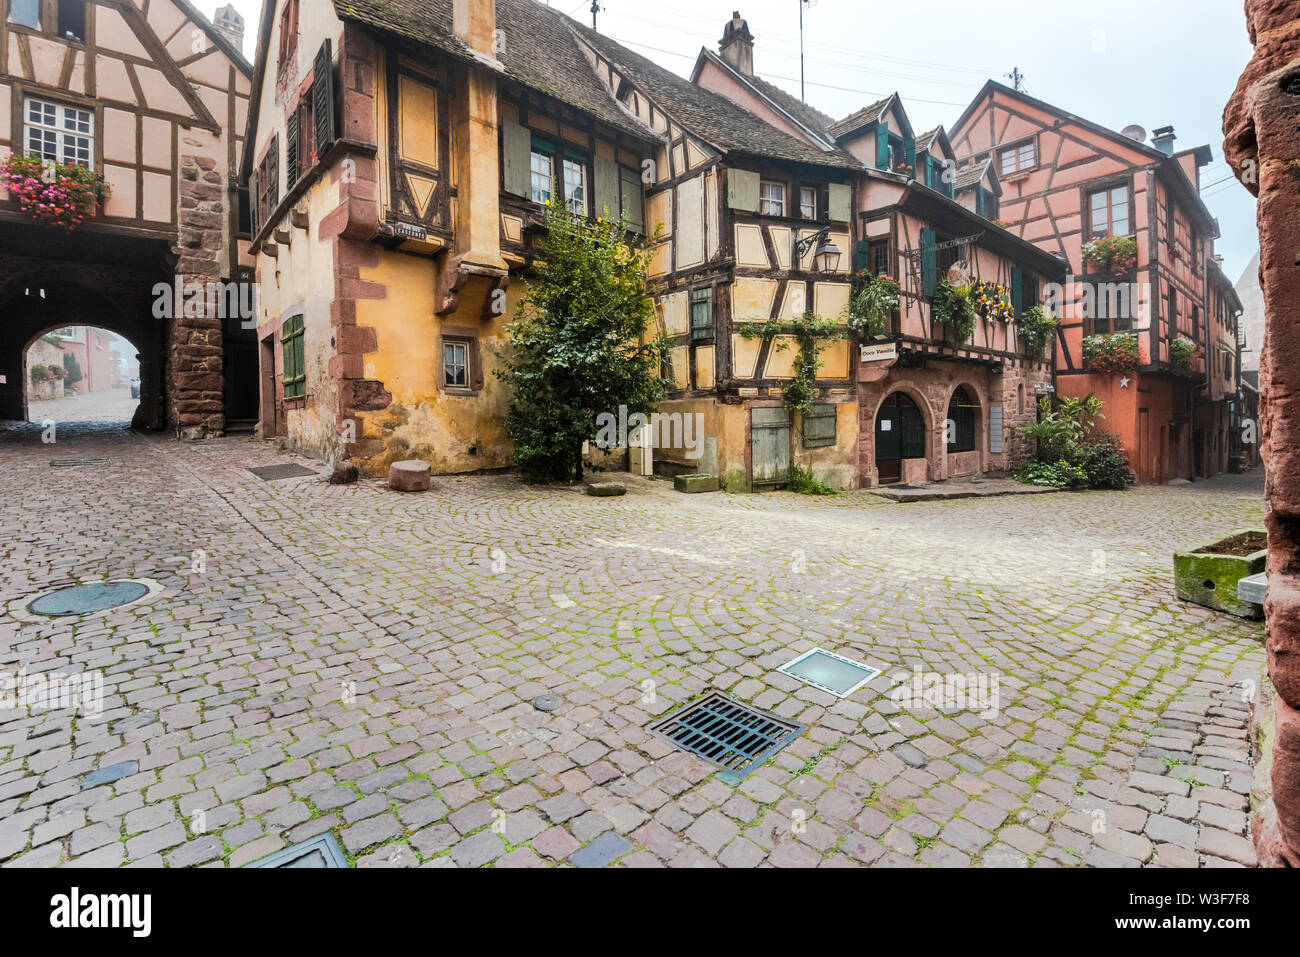 scenic ensemble with half-timbered houses in Riquewihr, Alsace Wine Route, France, medieval village and tourist destination Stock Photo